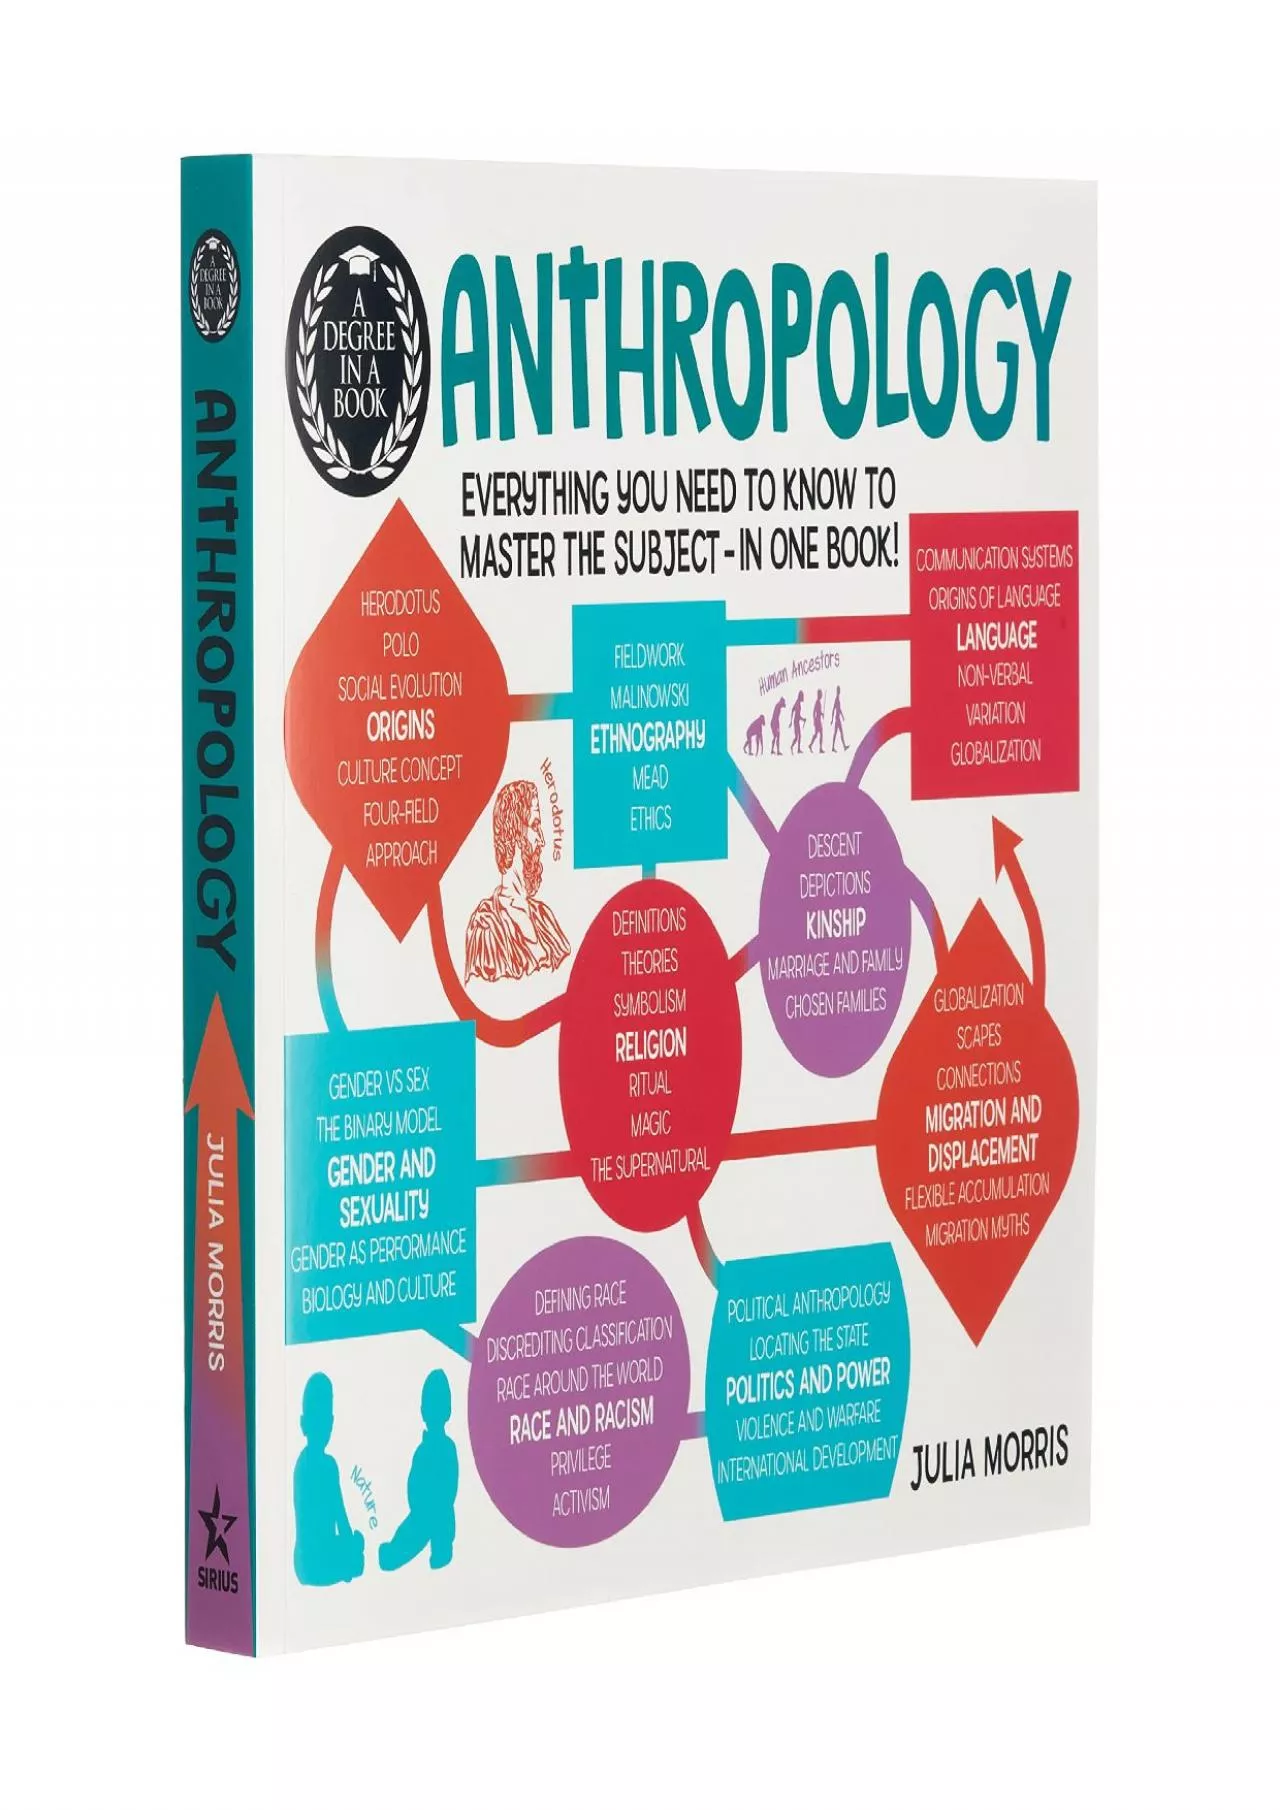 (READ)-A Degree in a Book: Anthropology: Everything You Need to Know to Master the Subject